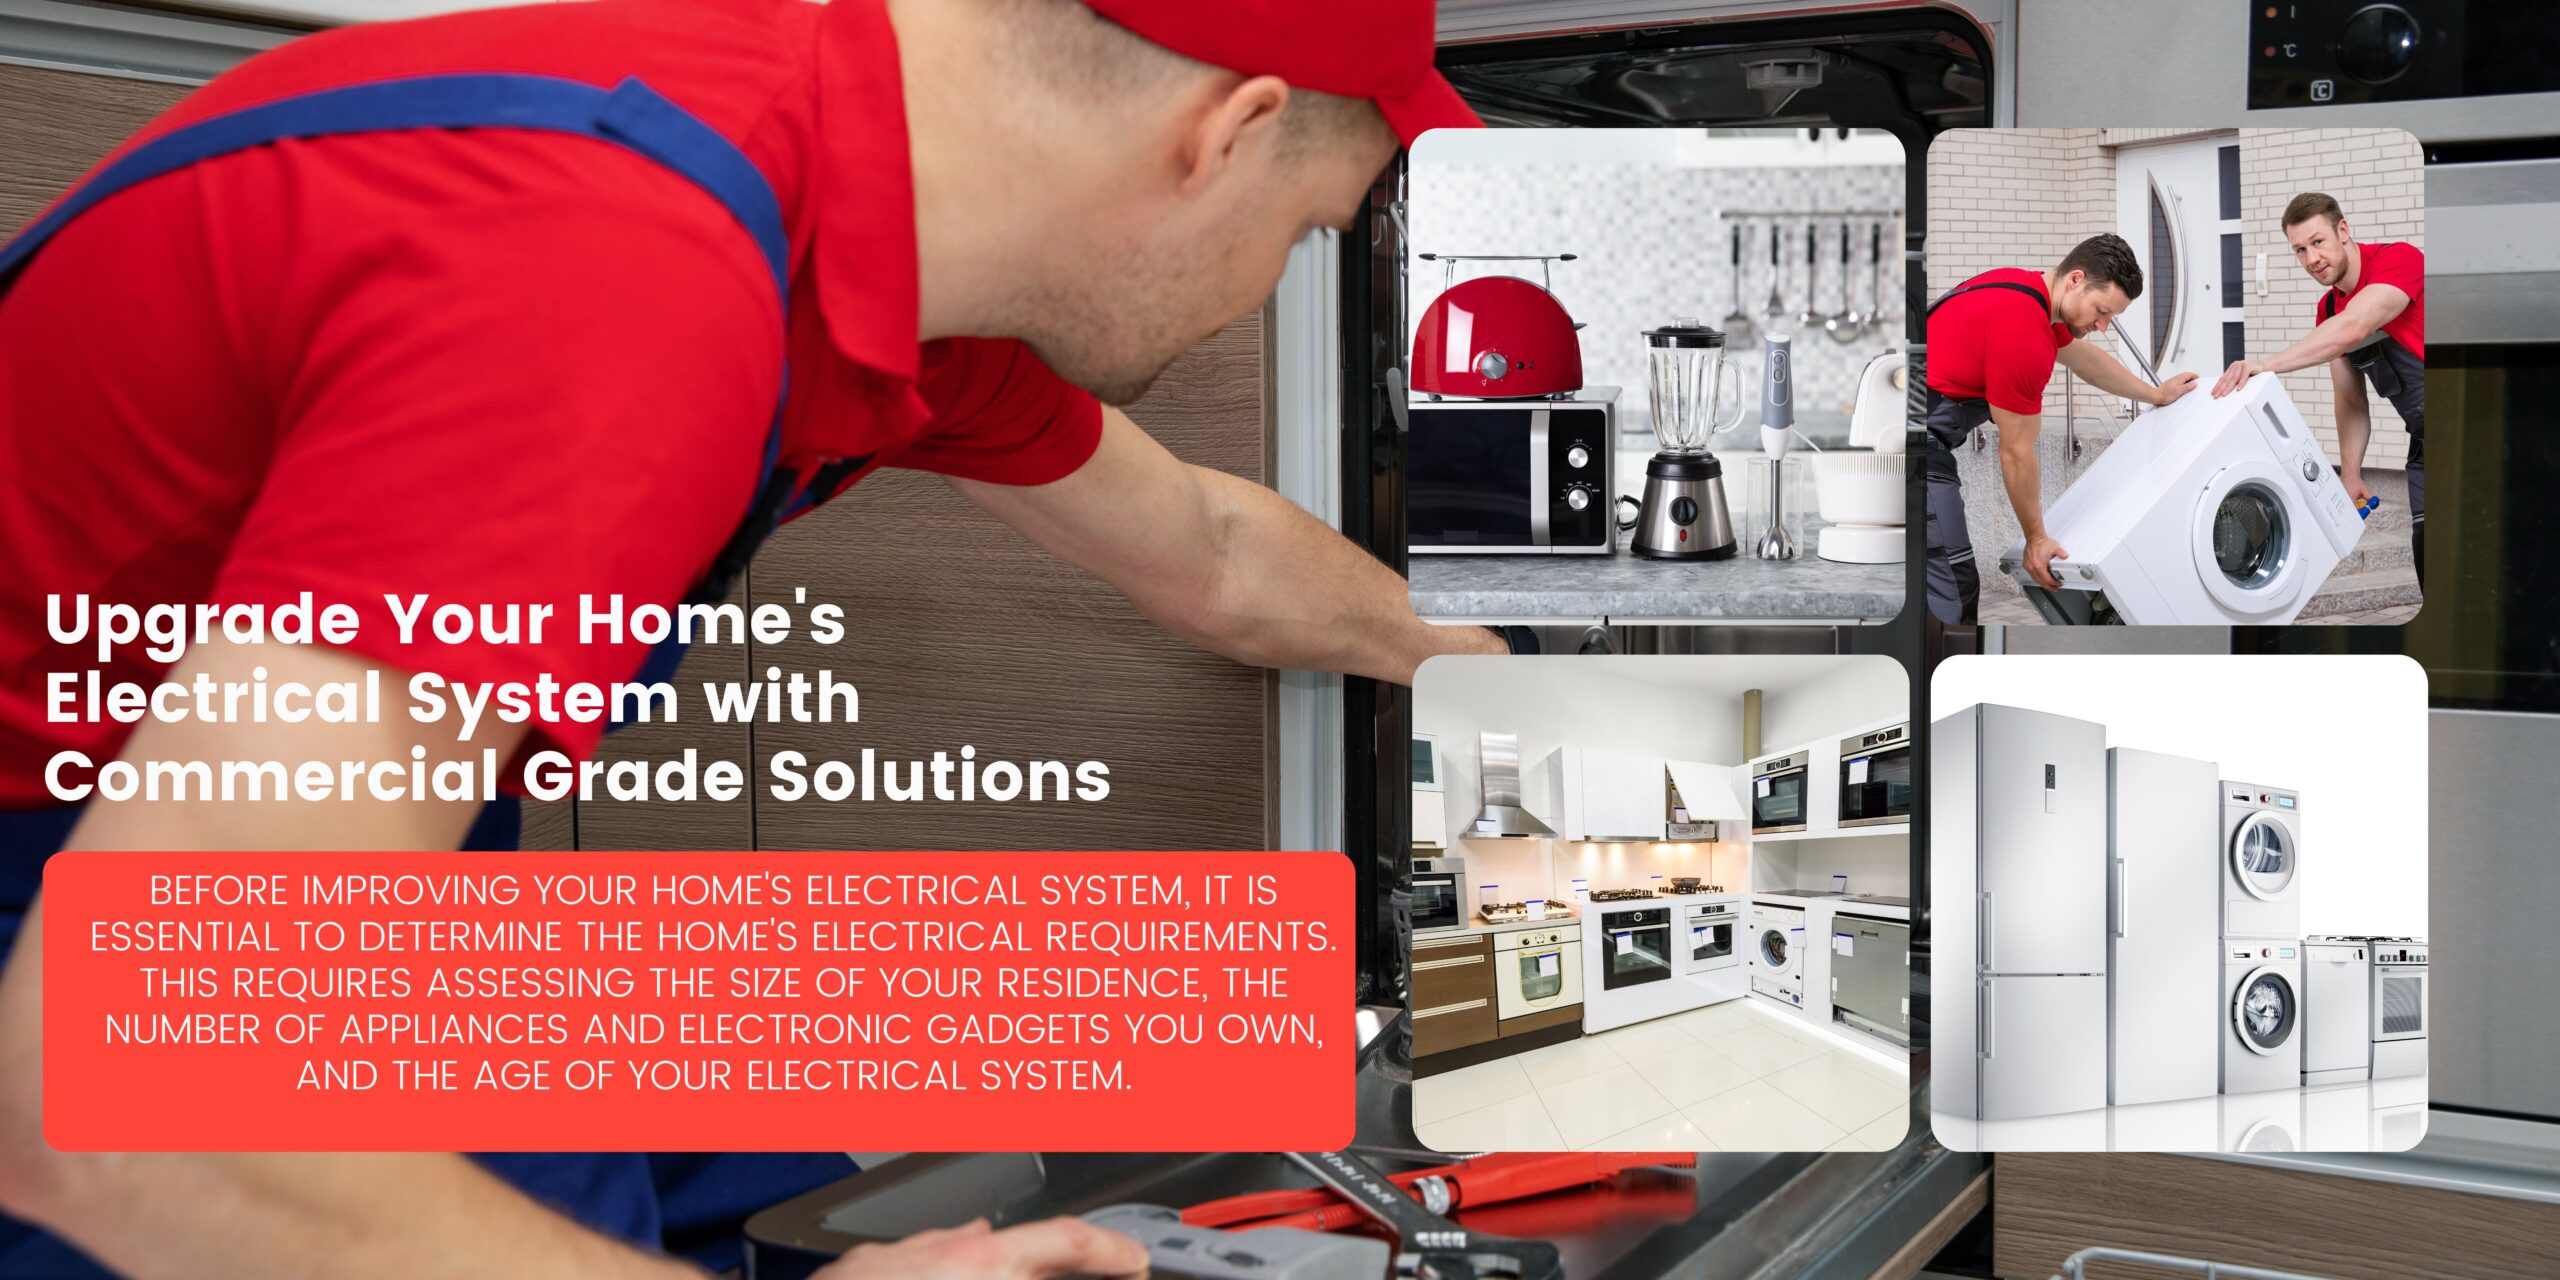 Upgrade Your Home's Electrical System with Commercial Grade Solutions